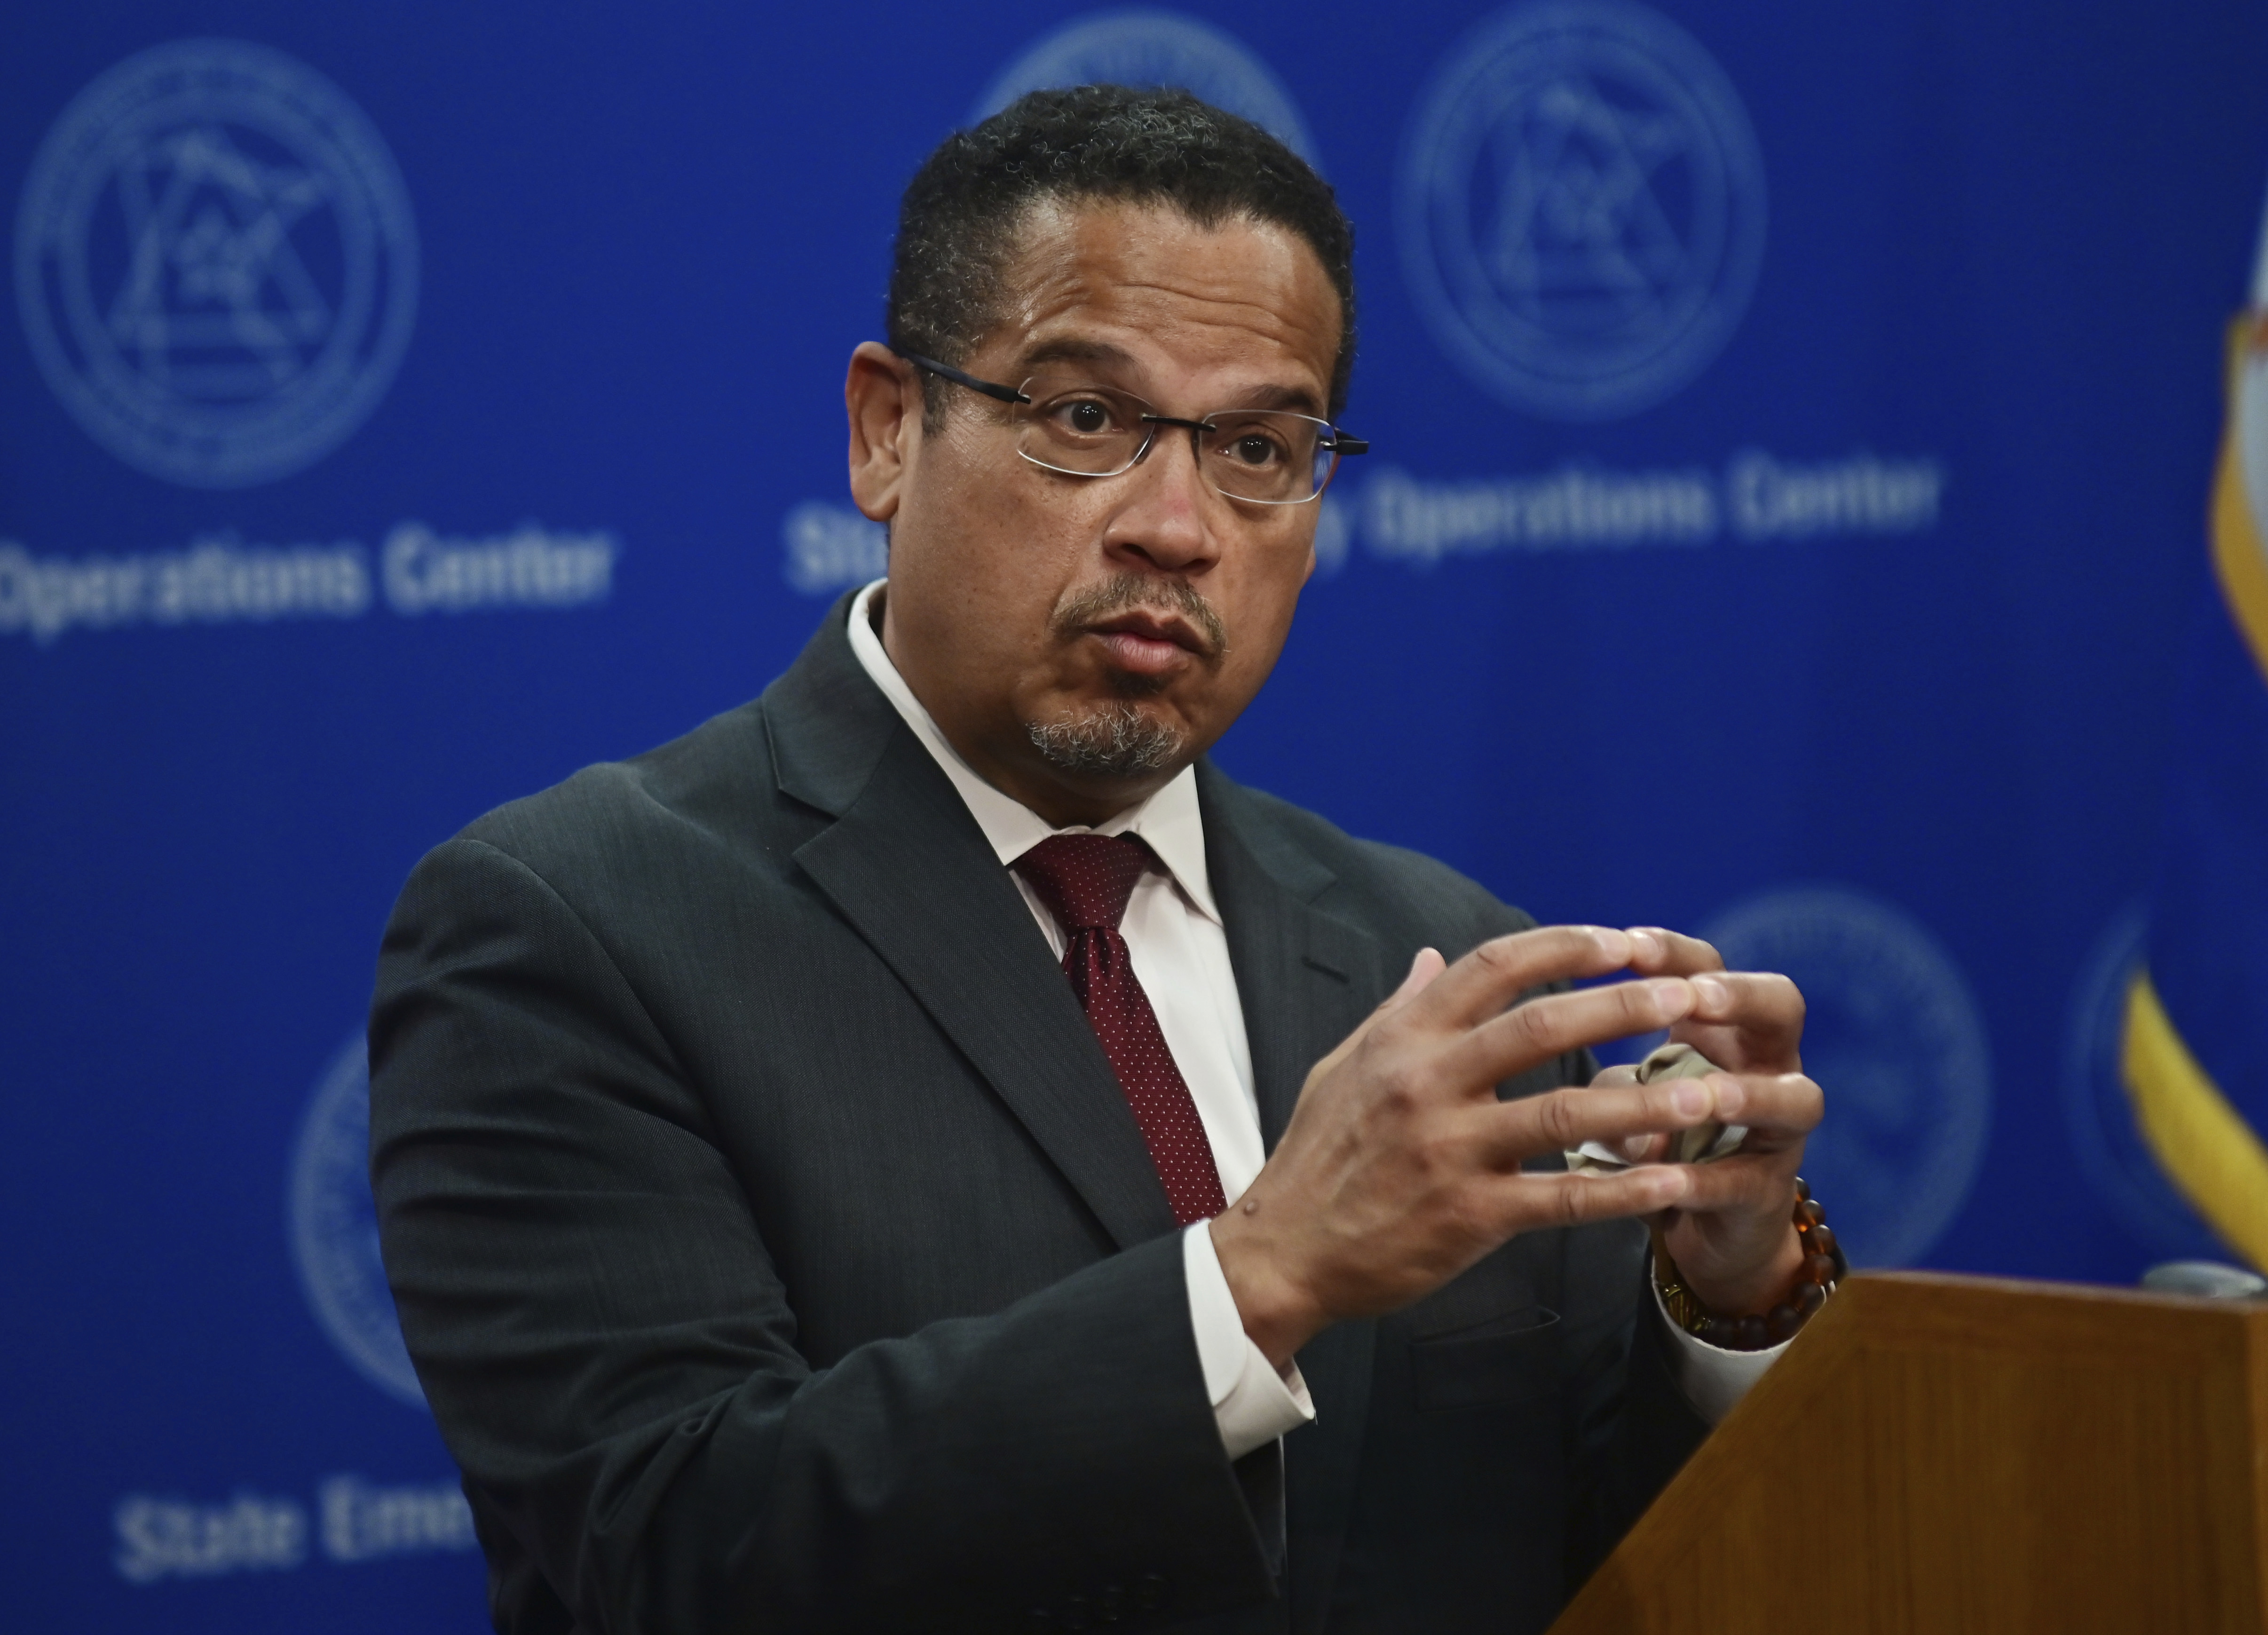 Minnesota Attorney General Keith Ellison answers questions about the investigation into the death of George Floyd during a news conference in St. Paul, Minnesota, on May 27.